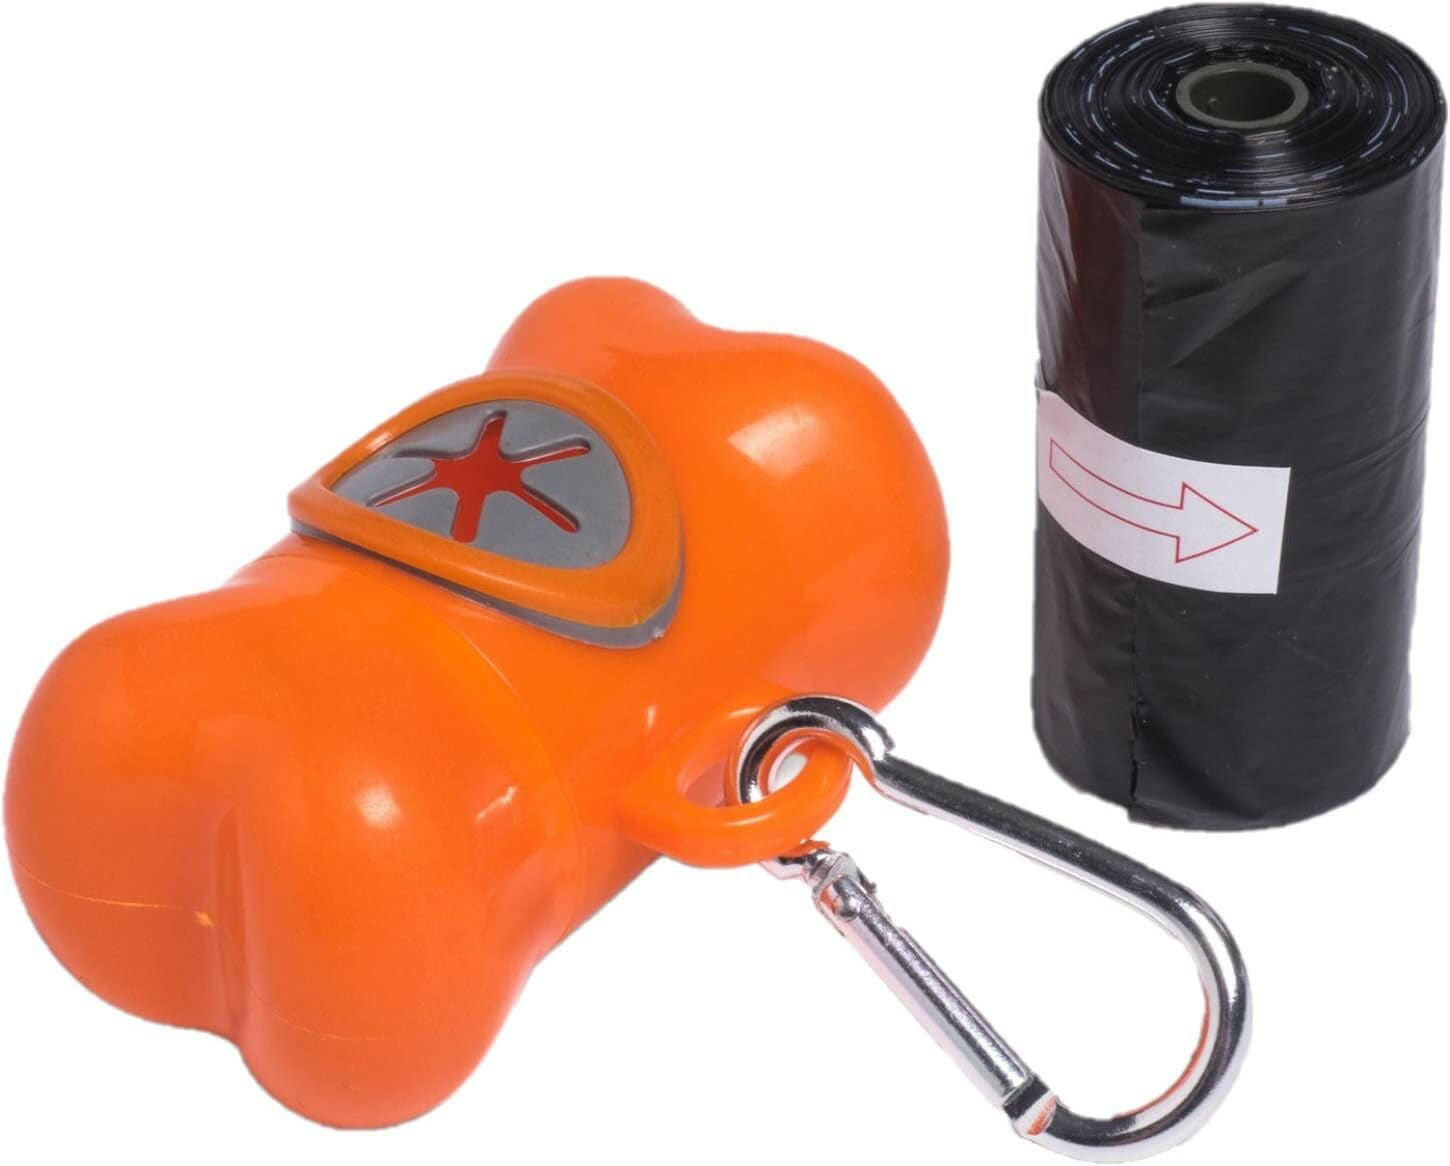 Convenient Dog Poop Bag Dispenser: Keep Your Walks Clean and Tidy